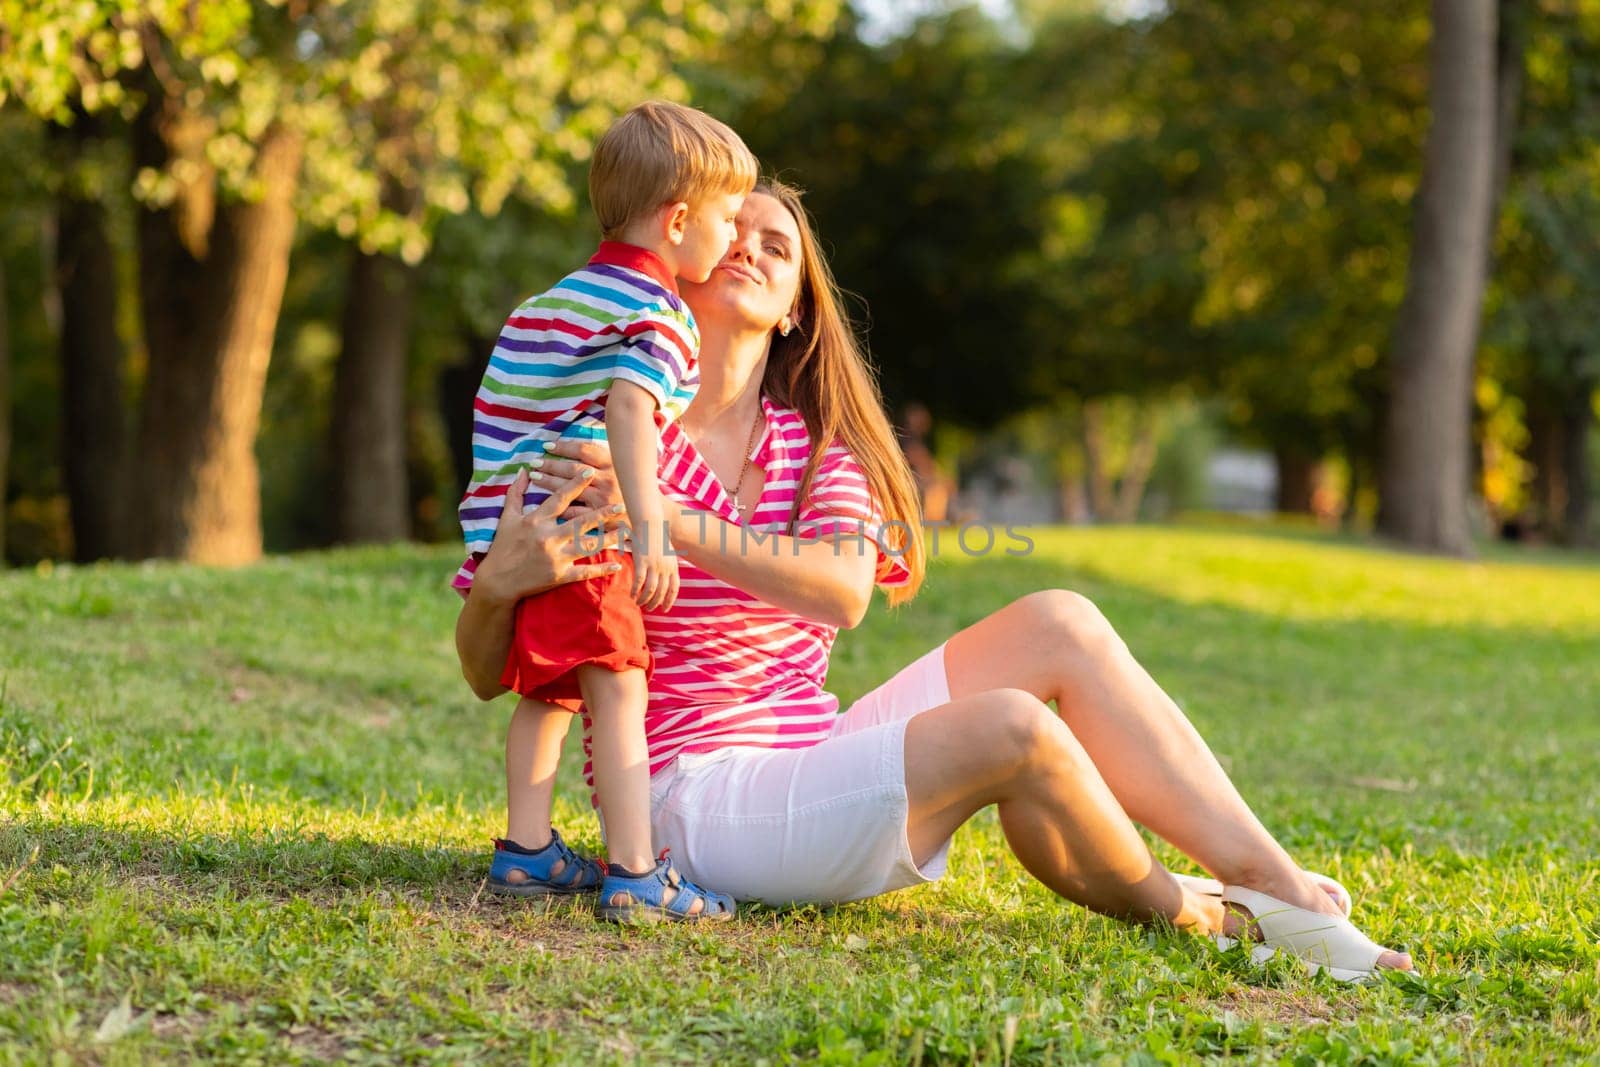 A tender moment as a mother embraces her young son in a loving hug while sitting in a sunlit park, enjoying the outdoors.